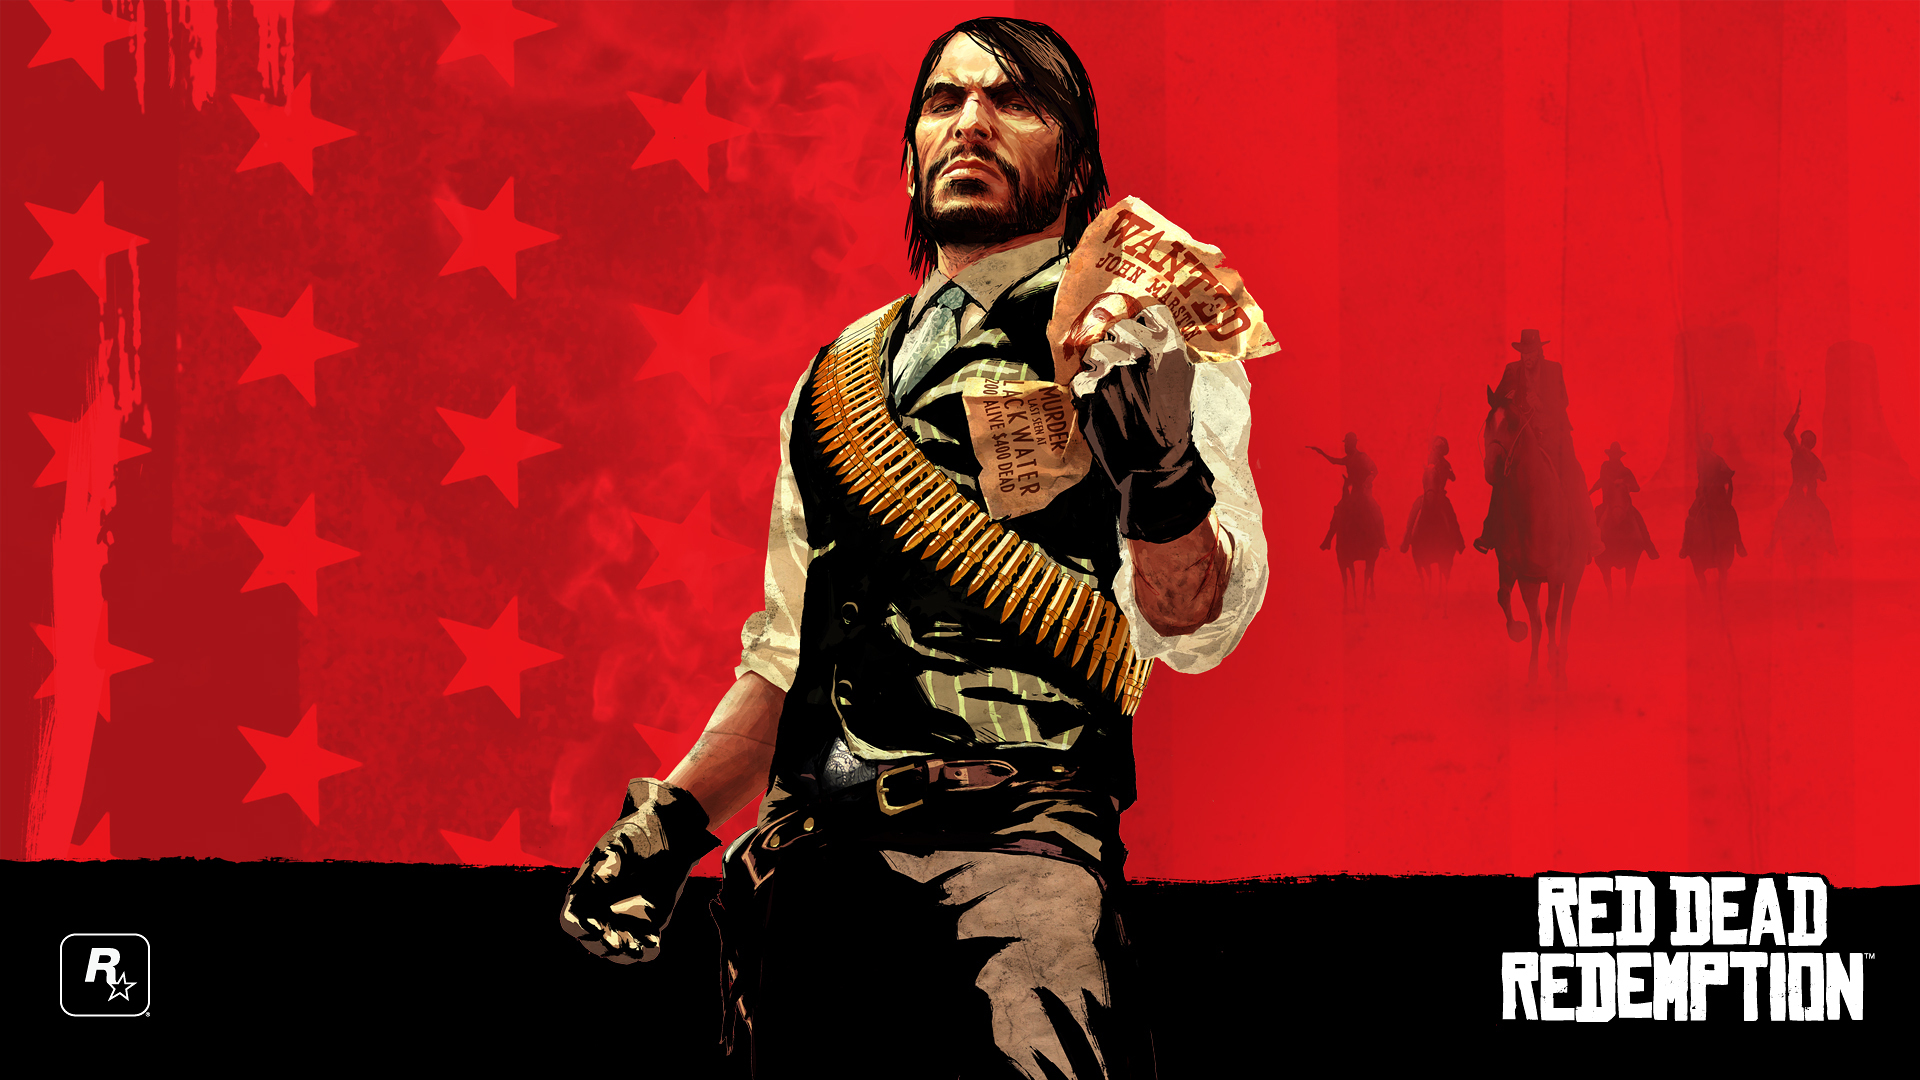 John Marston Wanted Red Dead Redemption Photo